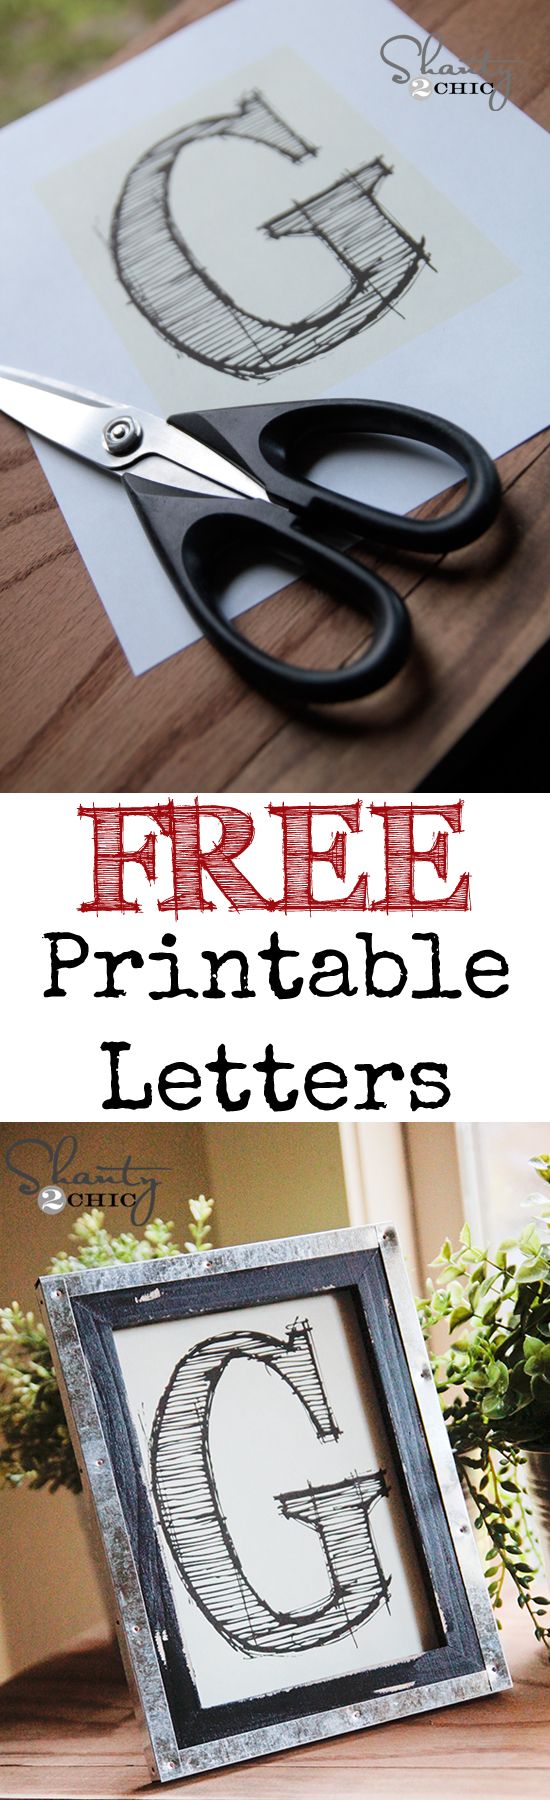 Free Printable Letters!  These are 5x7 and so cute!  Love these.